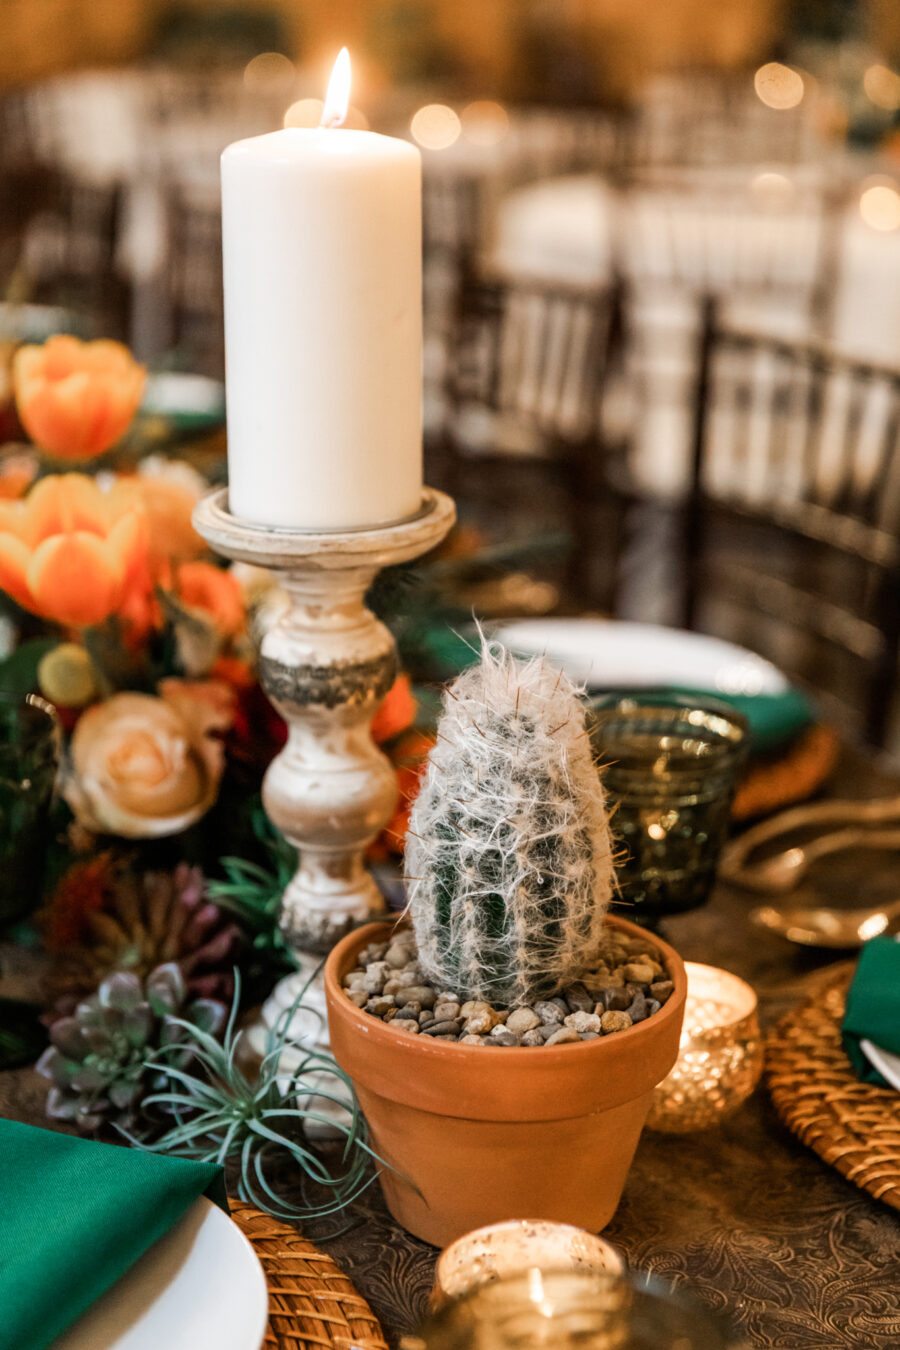 Cactus wedding centerpieces: Western Inspired Wedding by Laurie D'Anne Events featured on Nashville Bride Guide